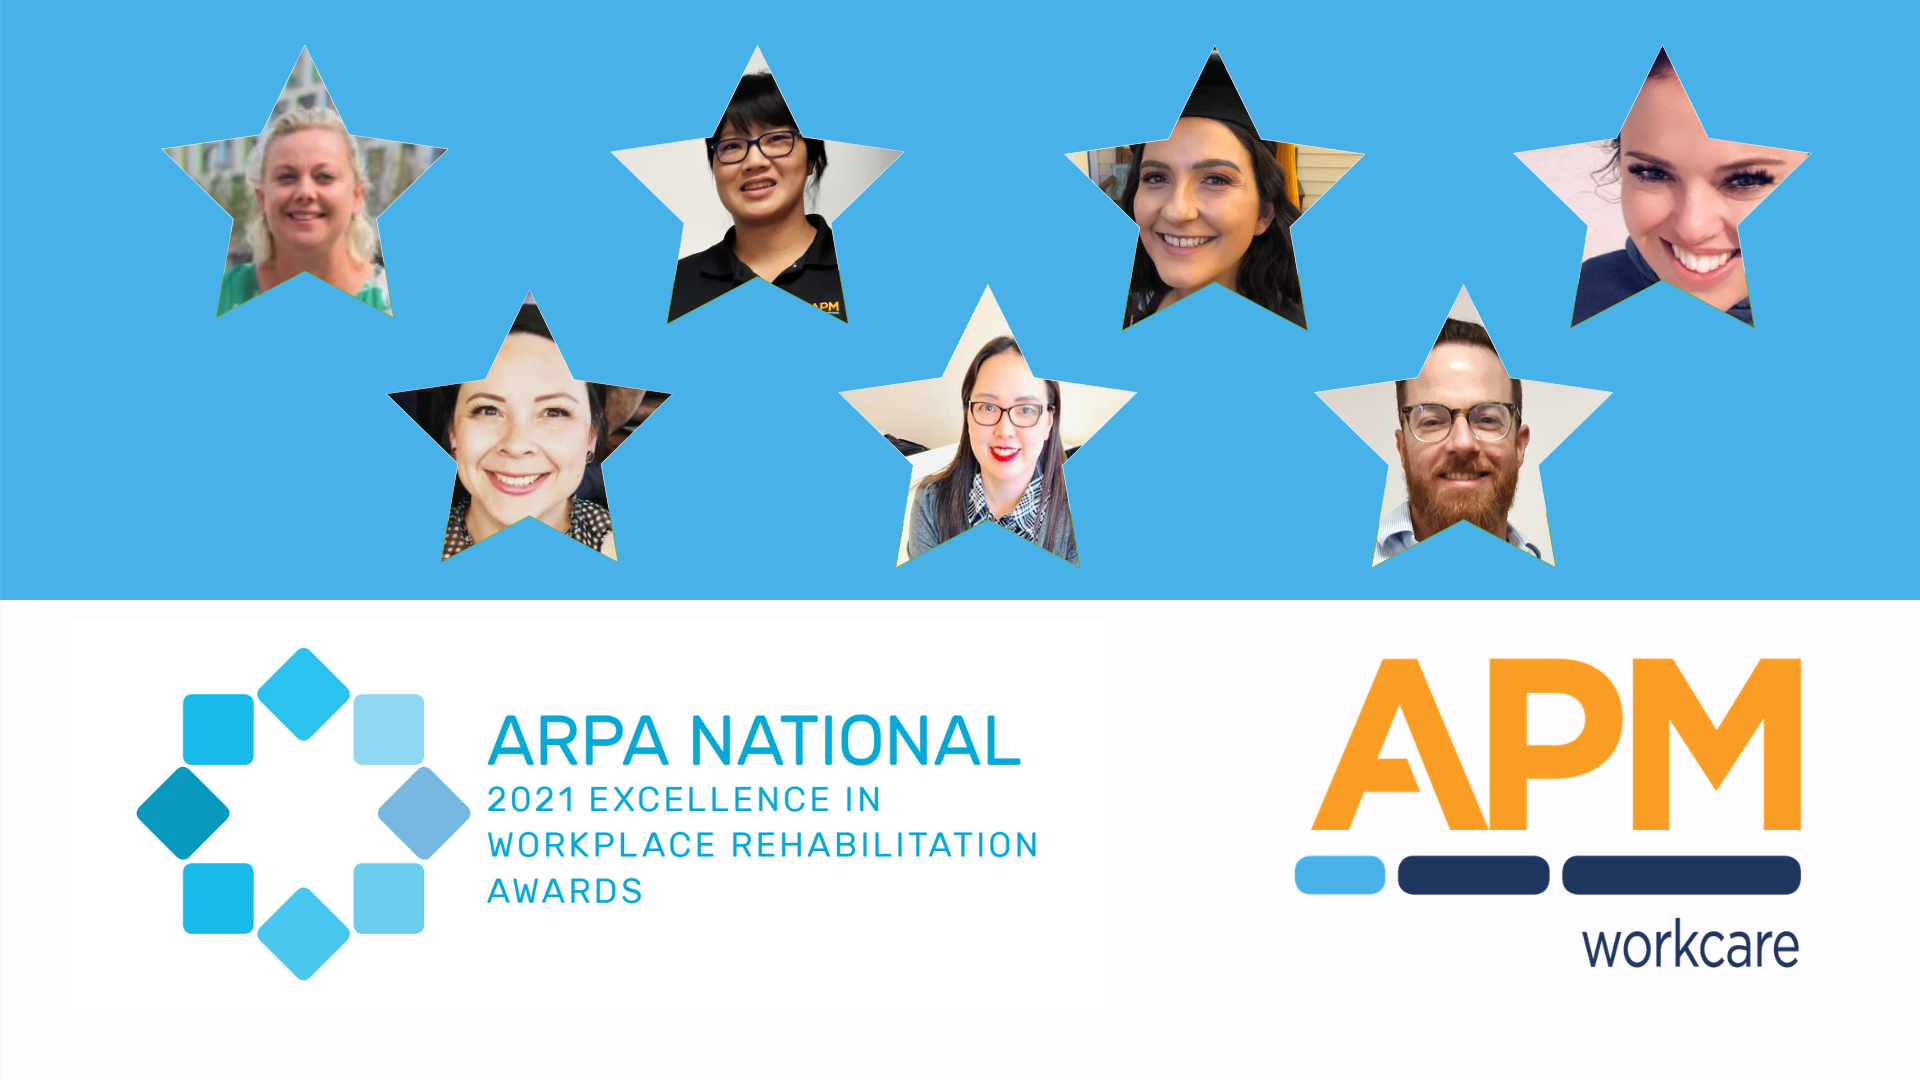 APM WorkCare team members nominated for an award